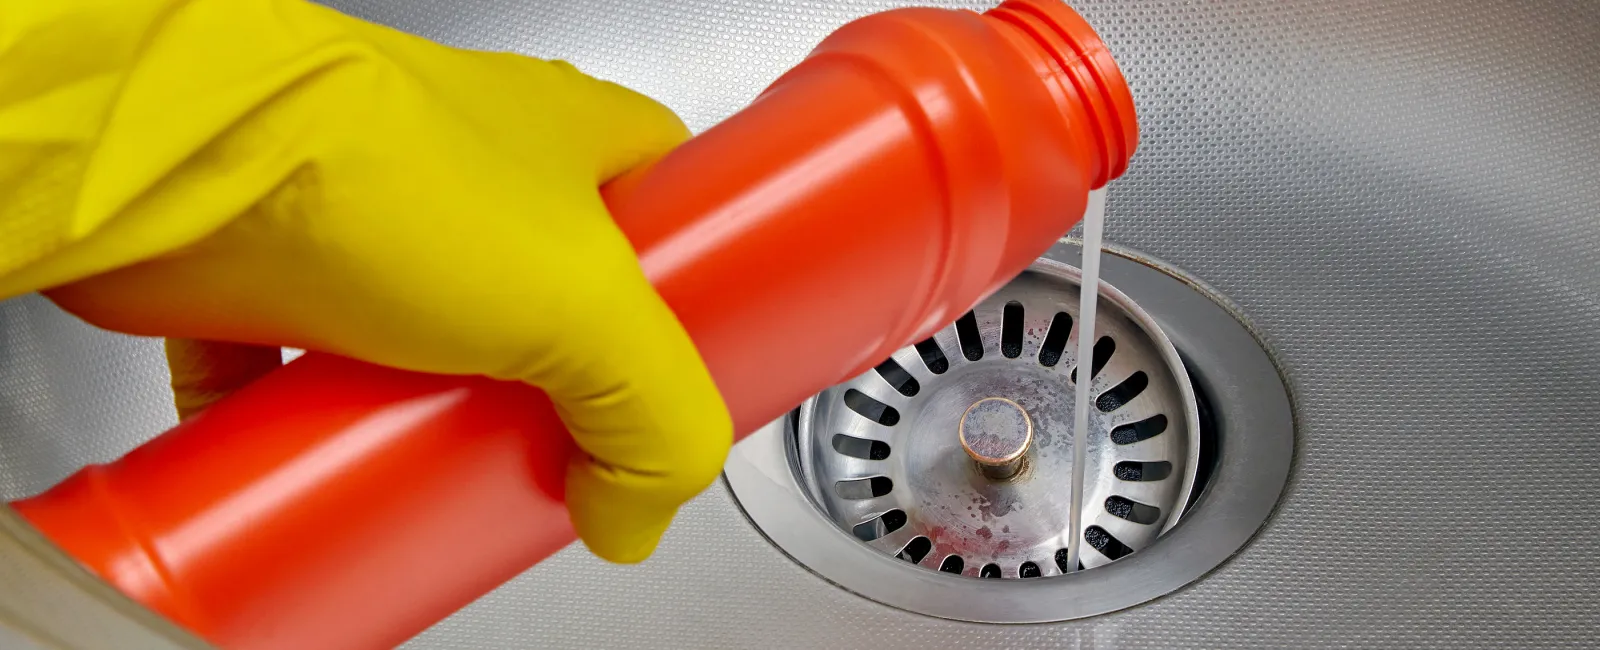 Say No to Drain Cleaning Chemicals